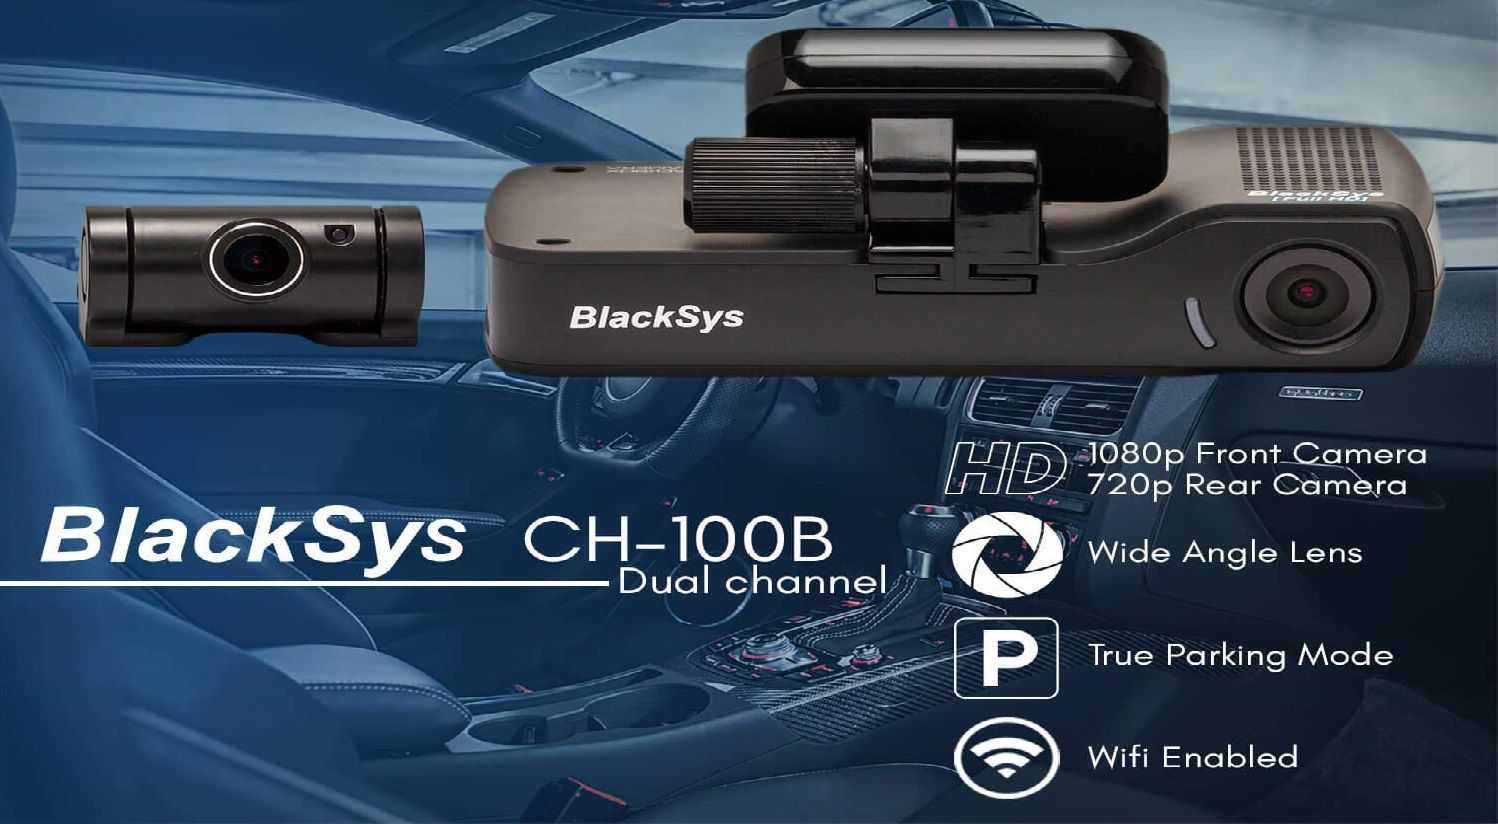 BlackSys CH-100B 2 Channel 1080P FULL HD Front and Rear